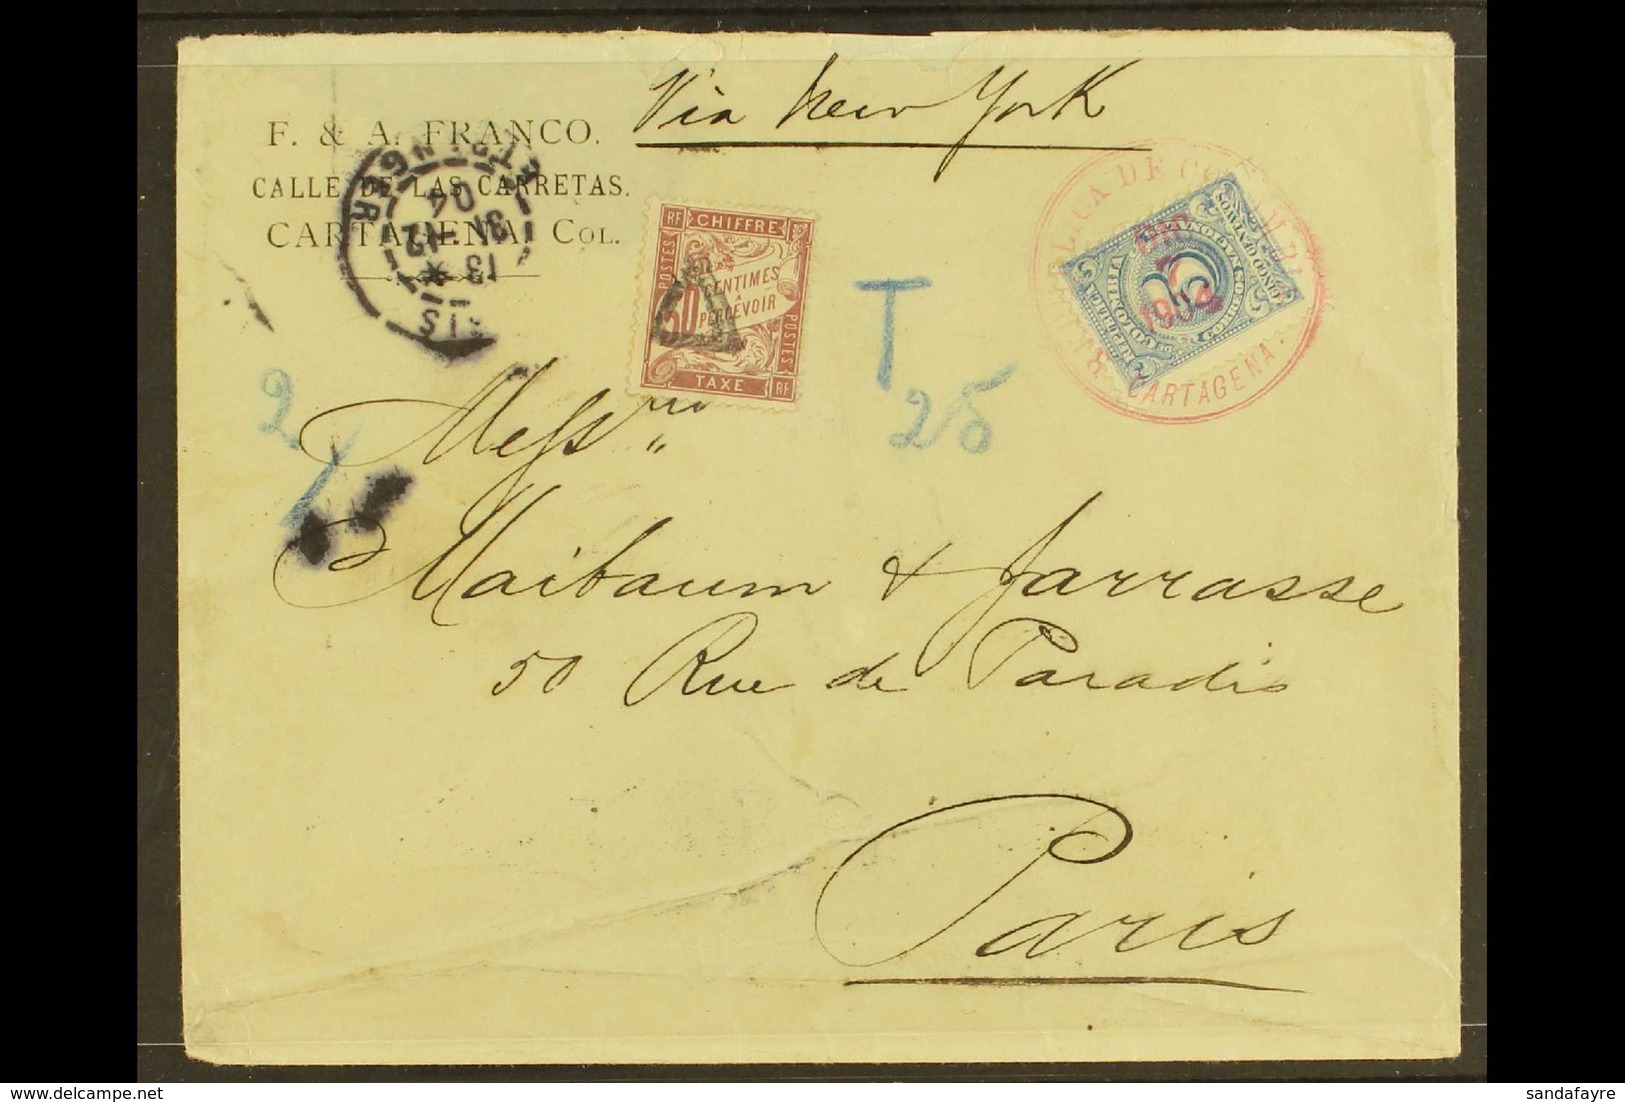 1904 POSTAGE DUE COVER TO PARIS Bearing 5c Blue Tied By "REPUBLICA DE COLOMBIA / CARTAGENA" Cds In Red Of DIC 7, 1904, A - Colombia